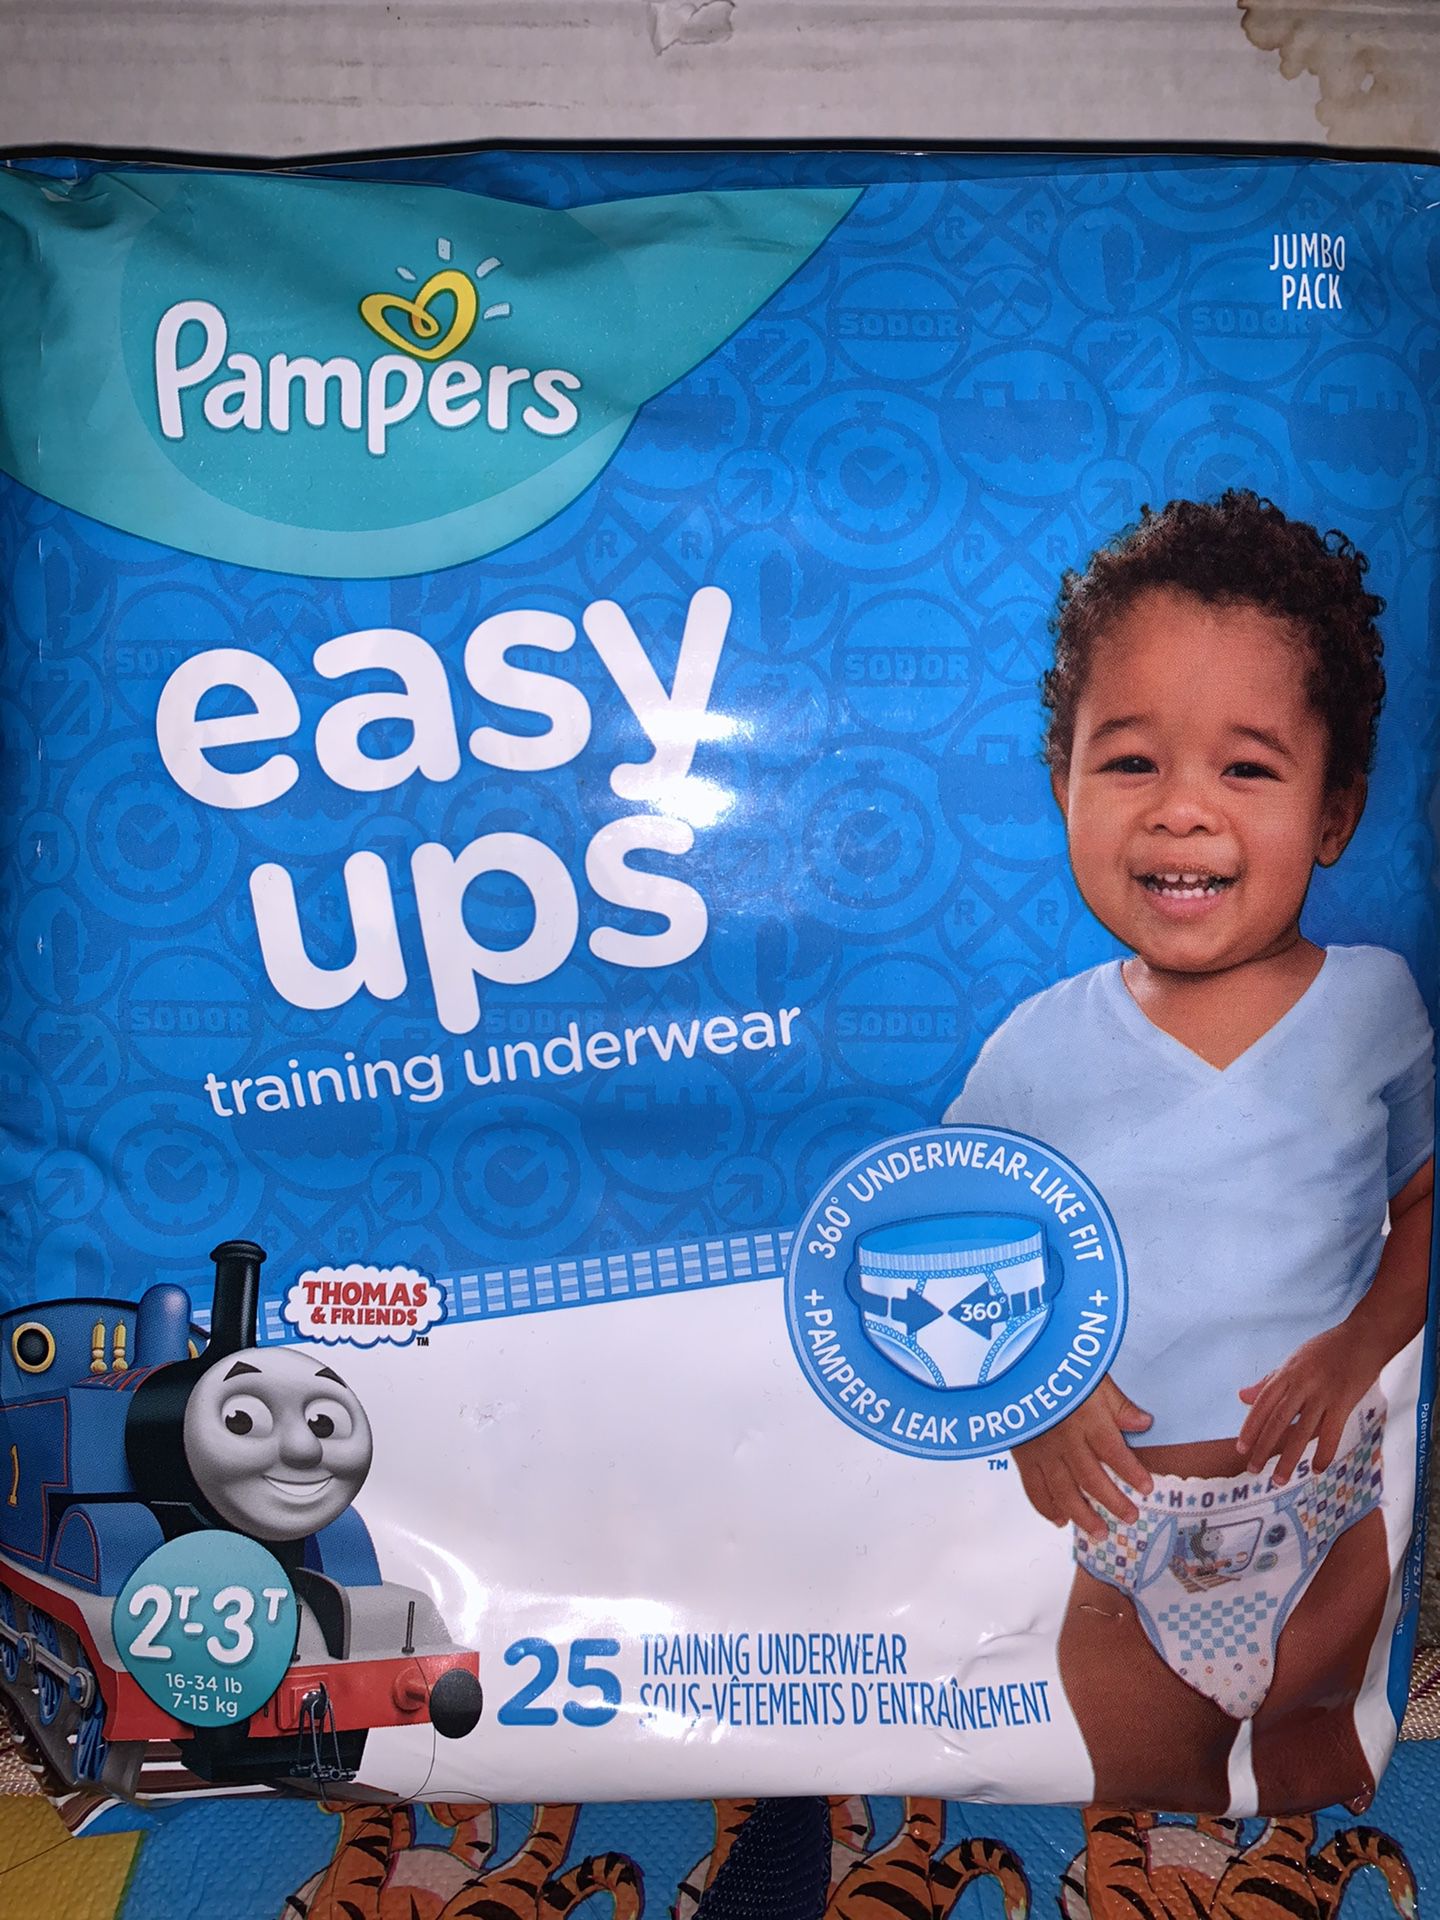 Pampers easy ups